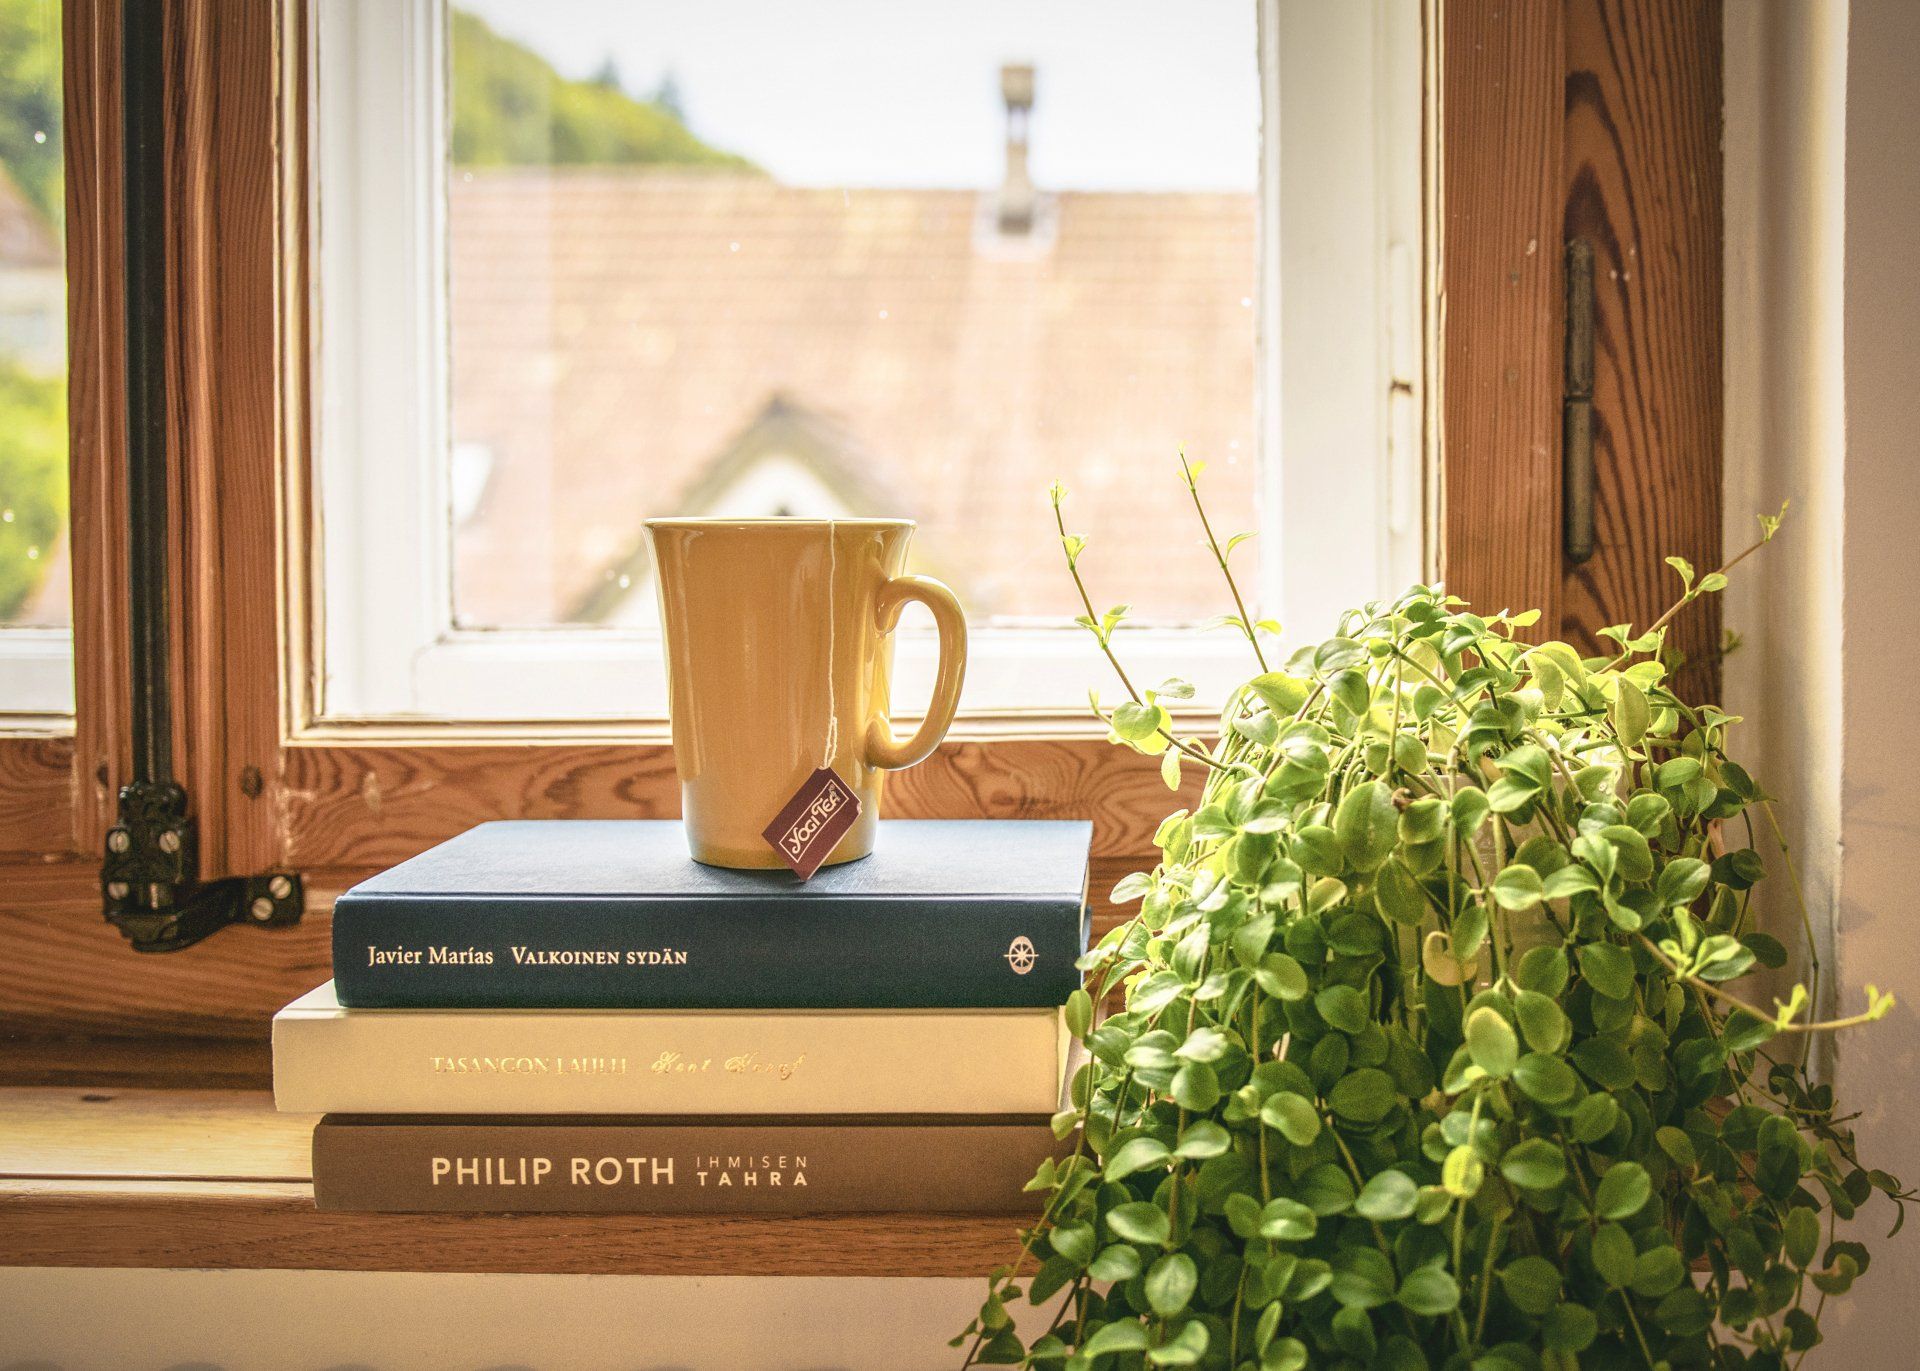 This image depicts a serene window scene, where a mustard yellow mug sits atop a stack of books.